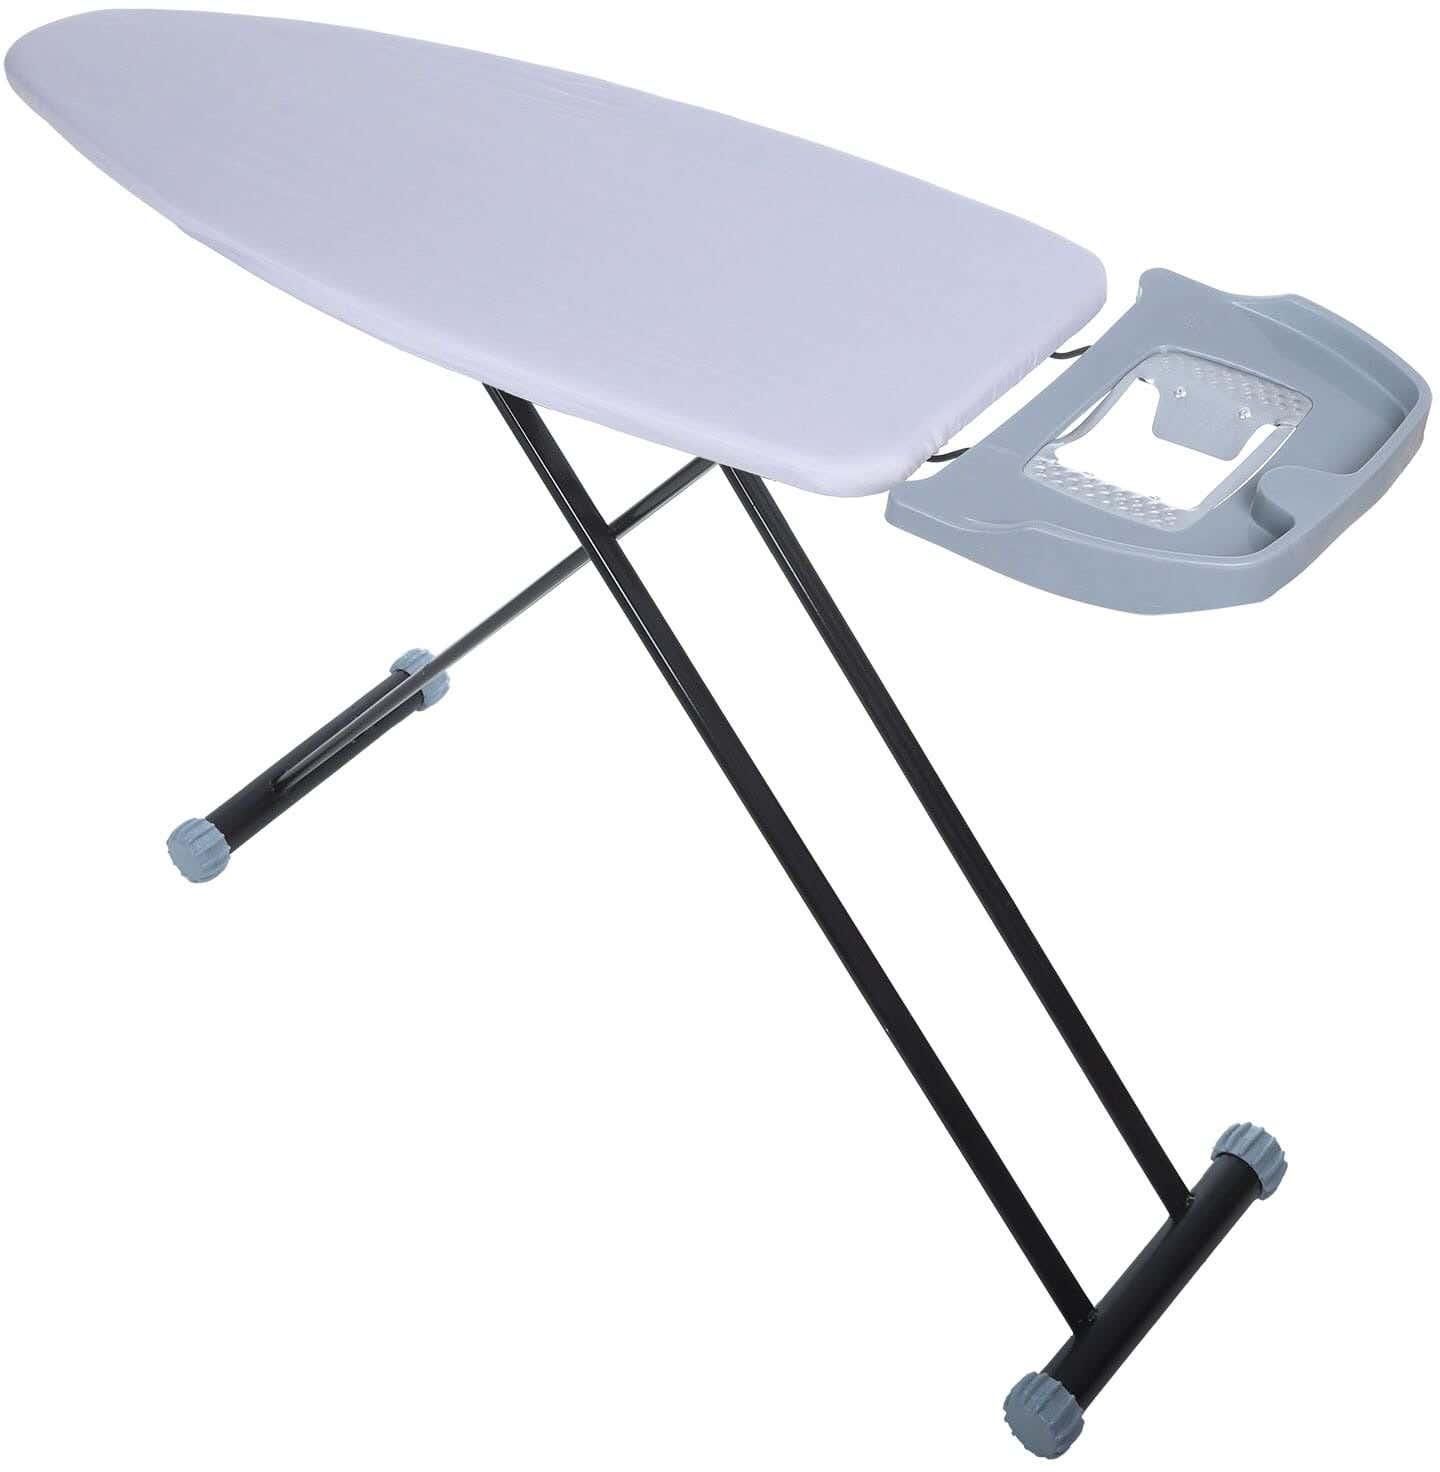 Get SARA Foldable Ironing Table, 160×45 cm - Blue with best offers | Raneen.com